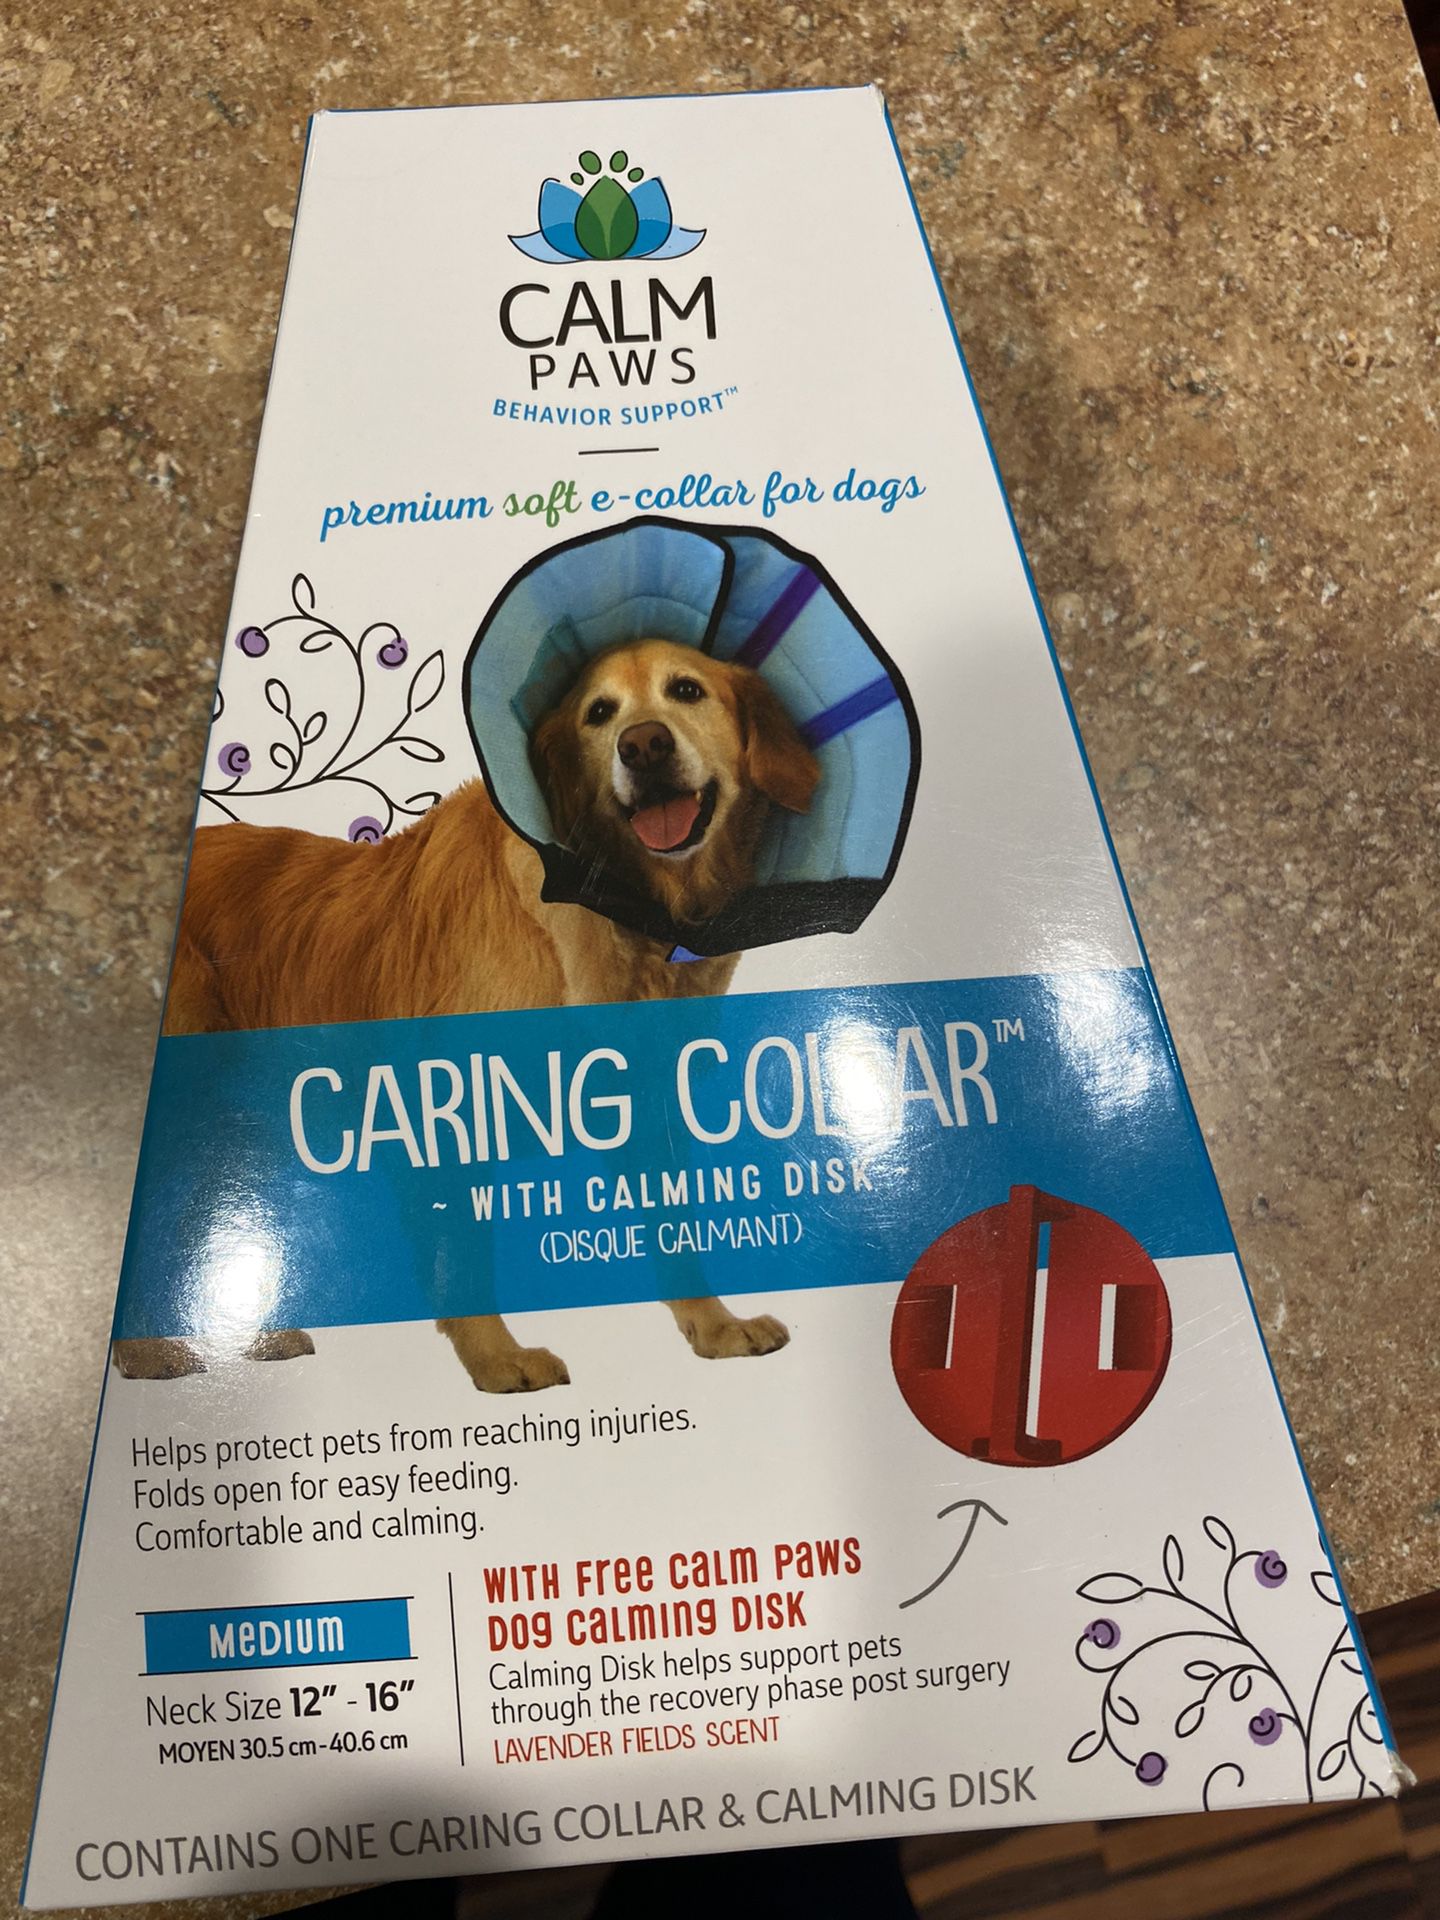 Caring Collar with calming disk for dogs